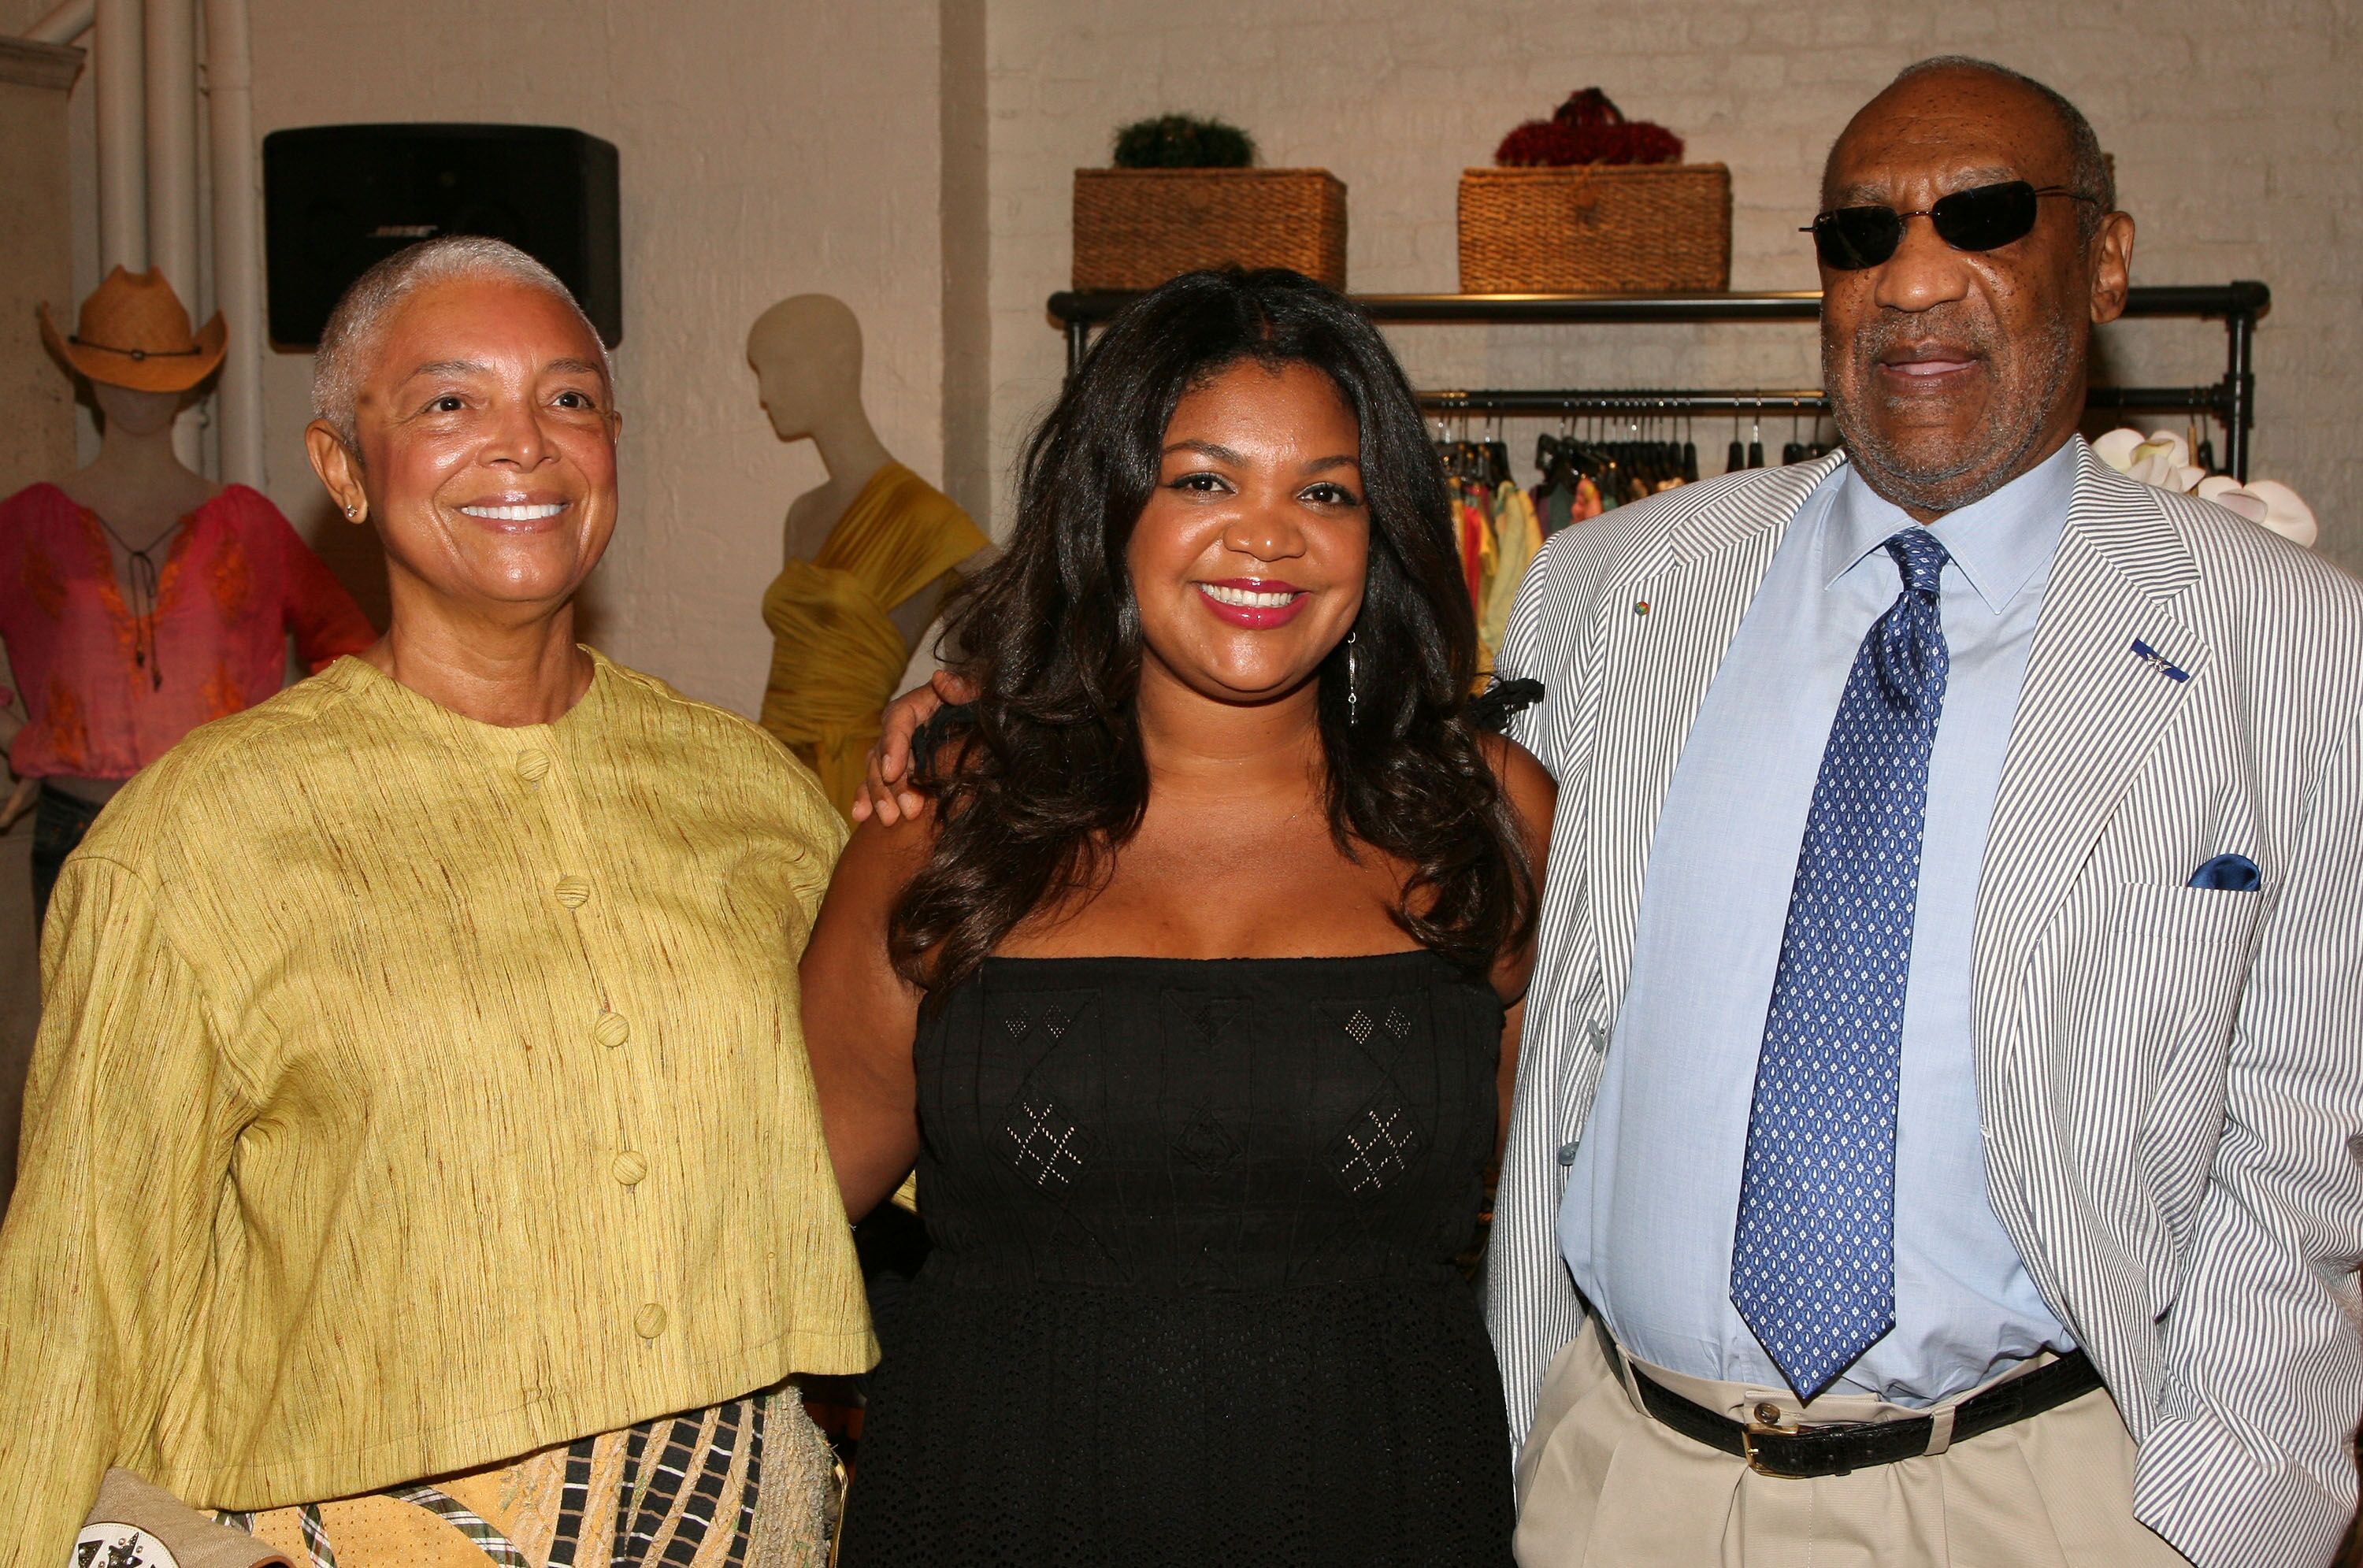 Camille, Evin and Bill Cosby at the launch of the pb&Caviar store in 2008 in New York City | Source: Getty Images